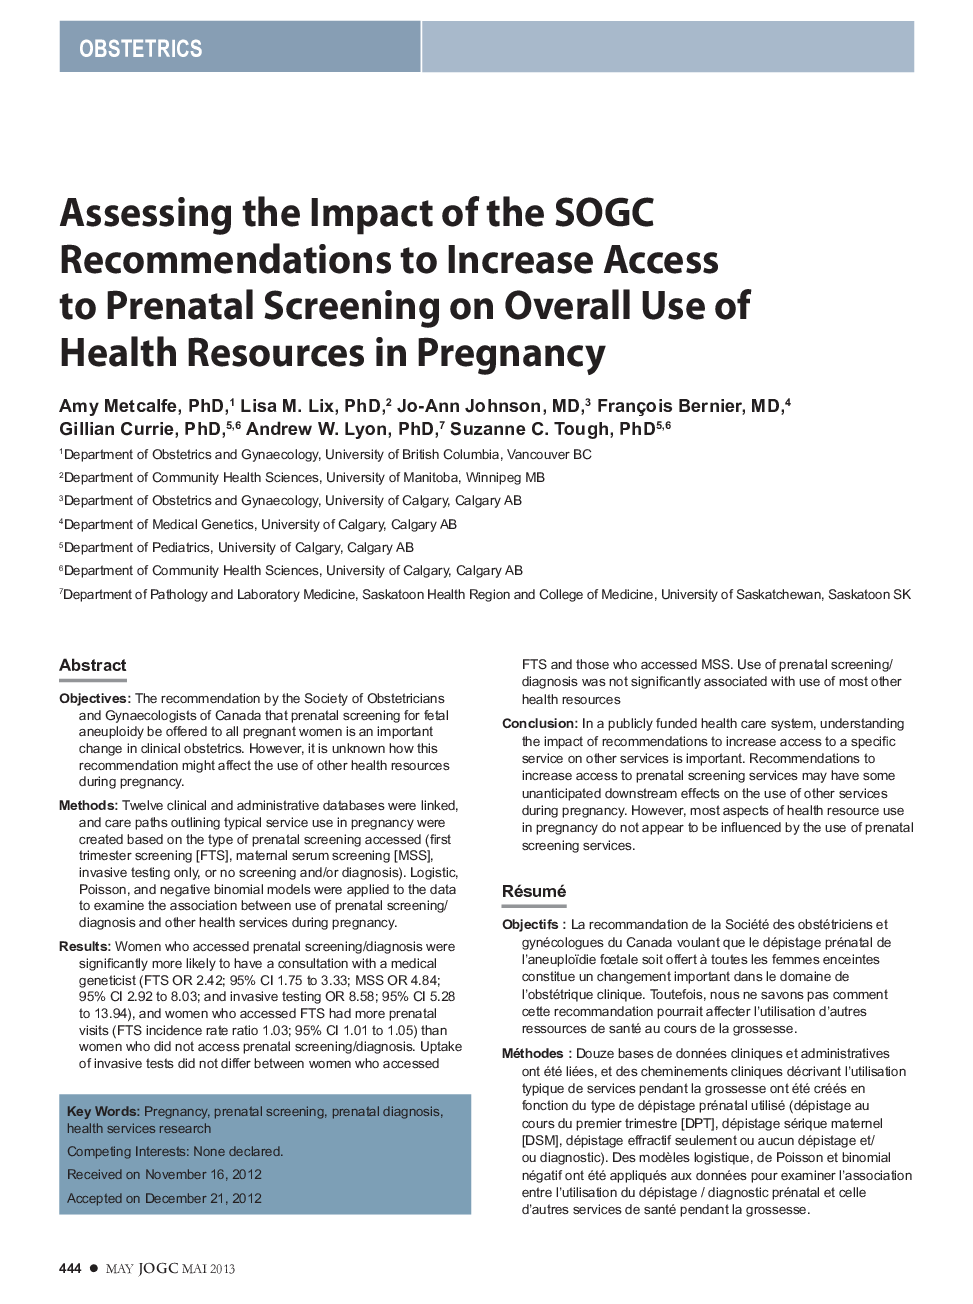 Assessing the Impact of the SOGC Recommendations to Increase Access to prenatal Screening on Overall Use of Health Resources in Pregnancy